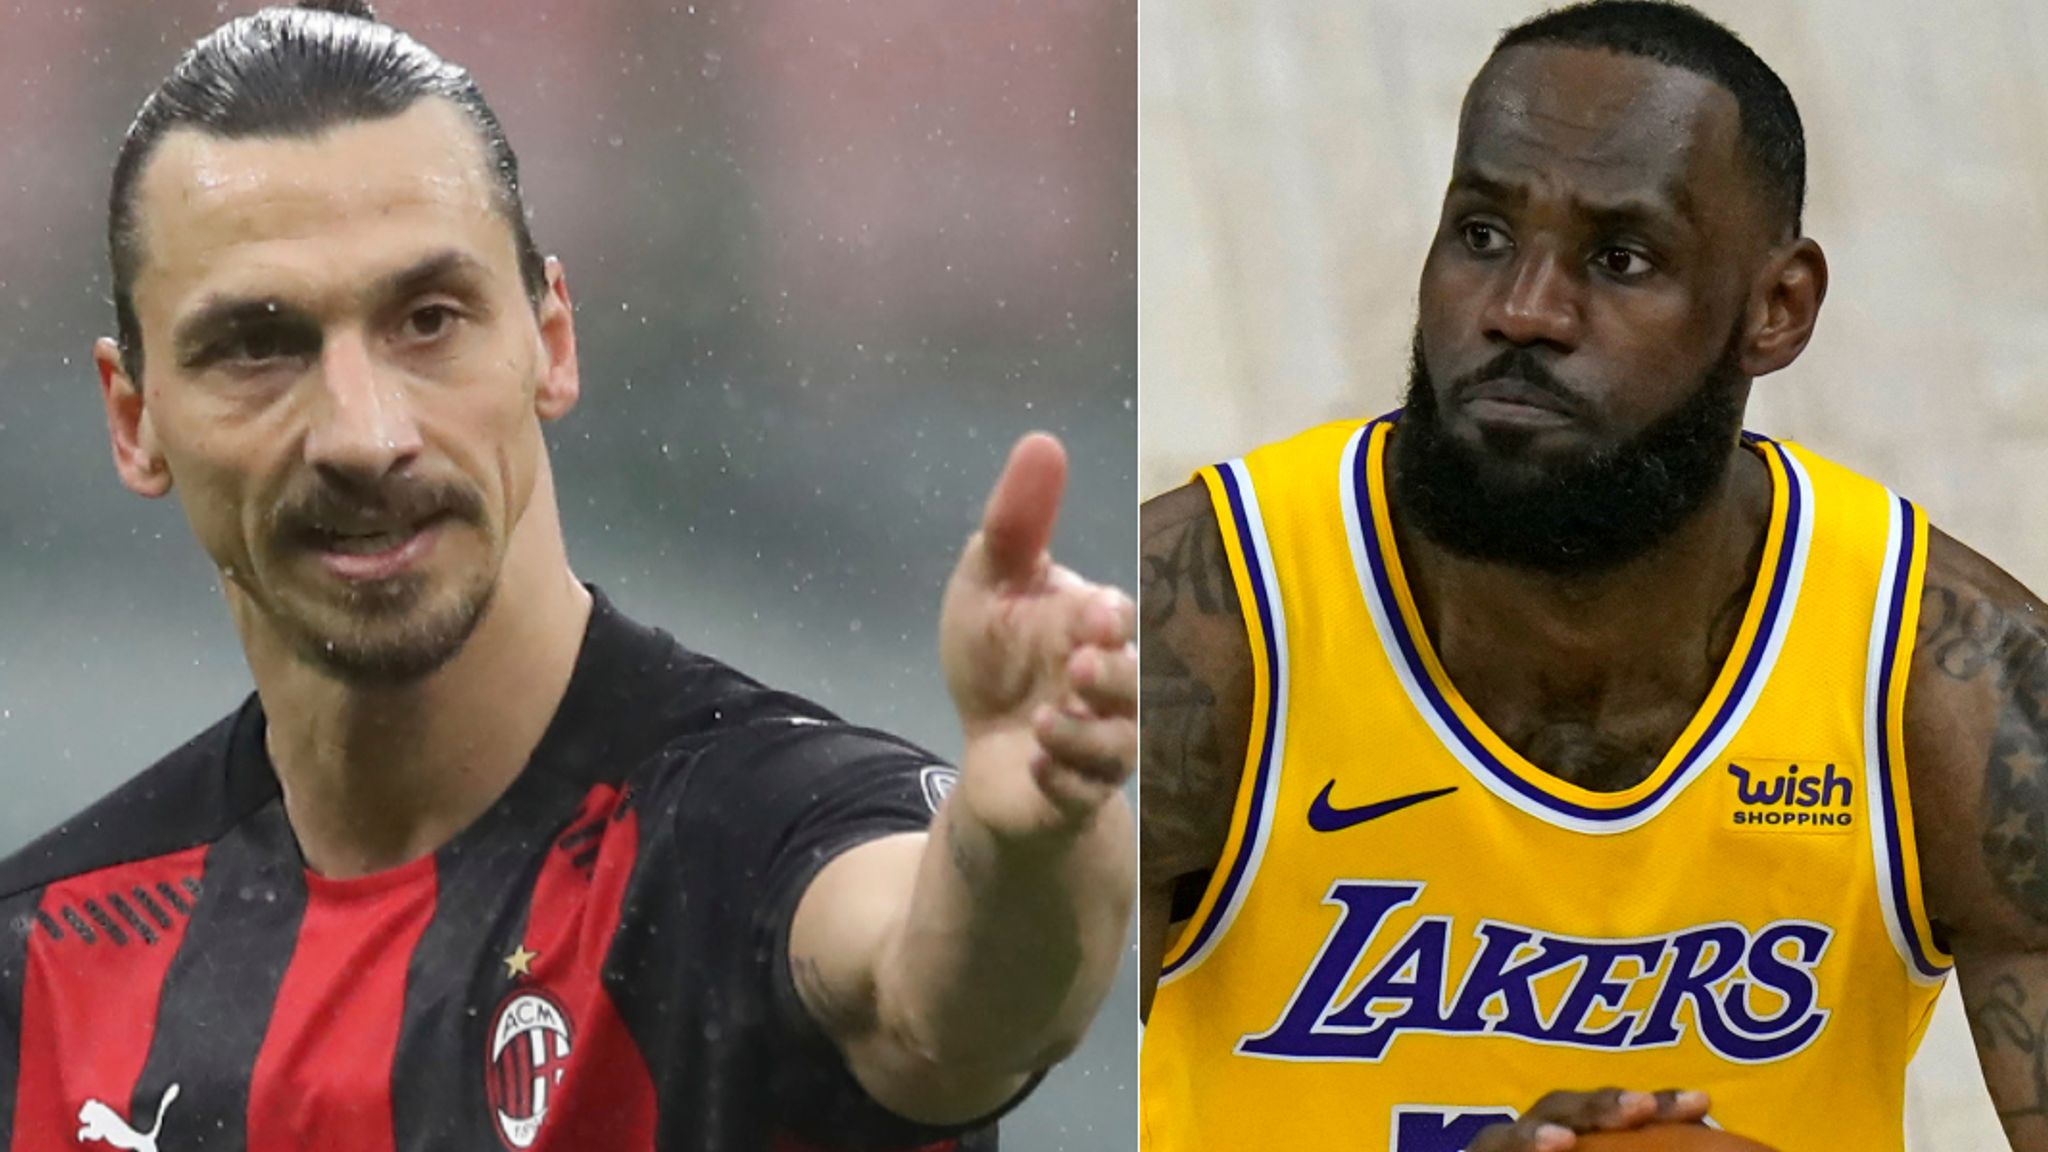 Zlatan Ibrahimovic To LeBron James: Stick To Sports, Stay Out Of